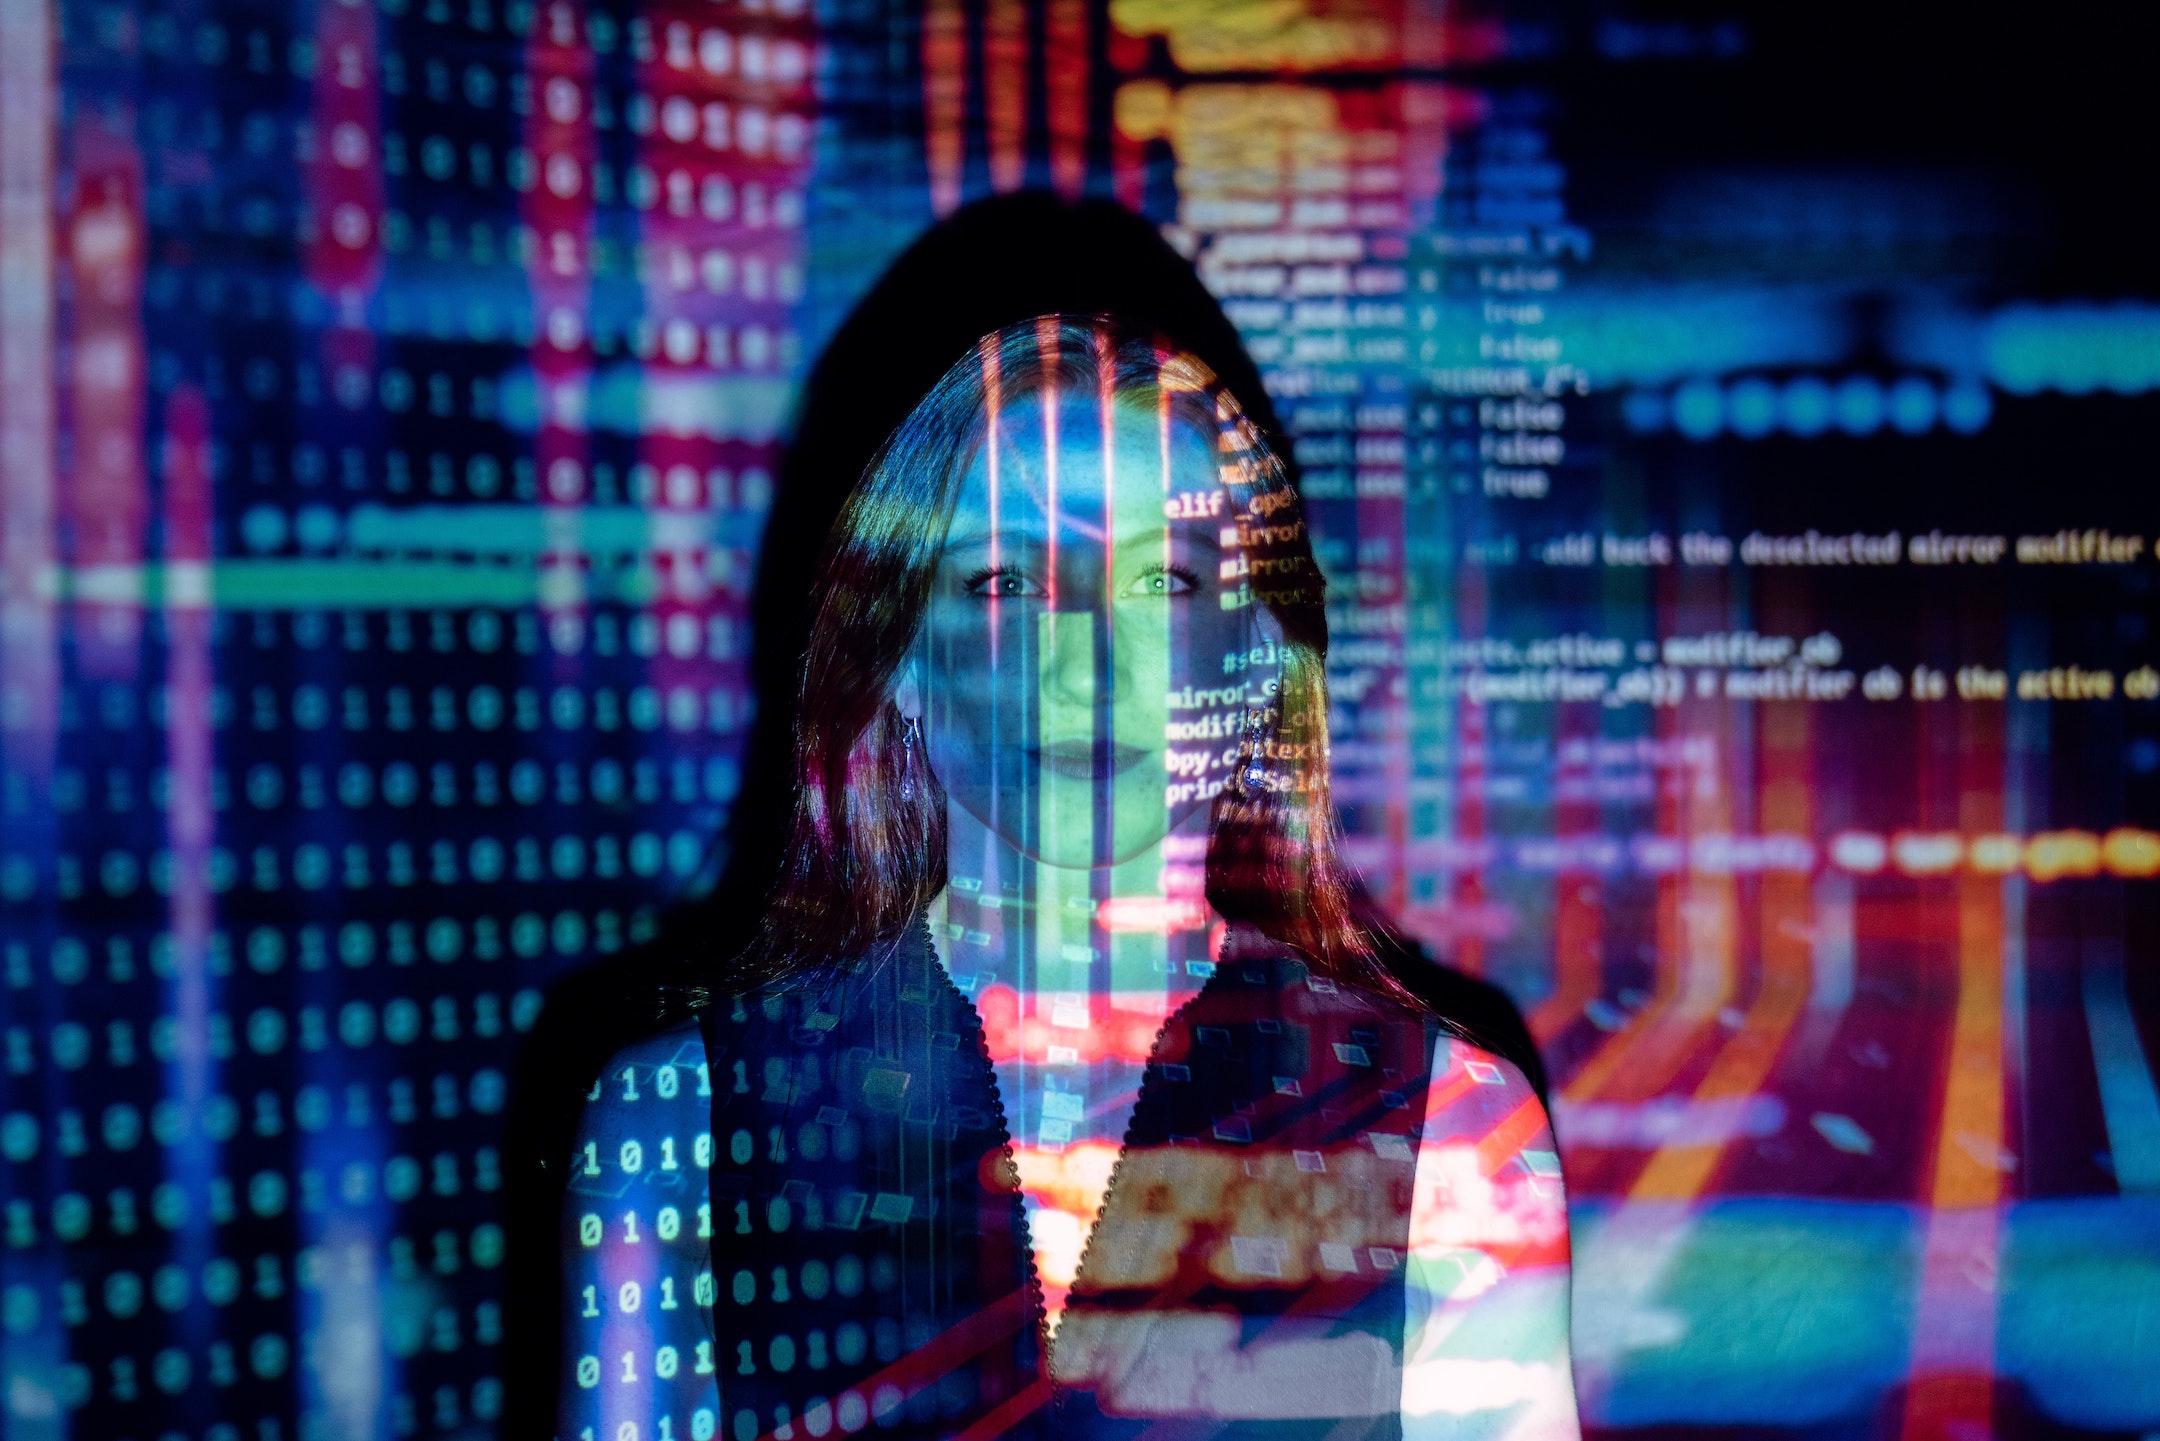 Woman's face in front of a screen with computer code projected on her face